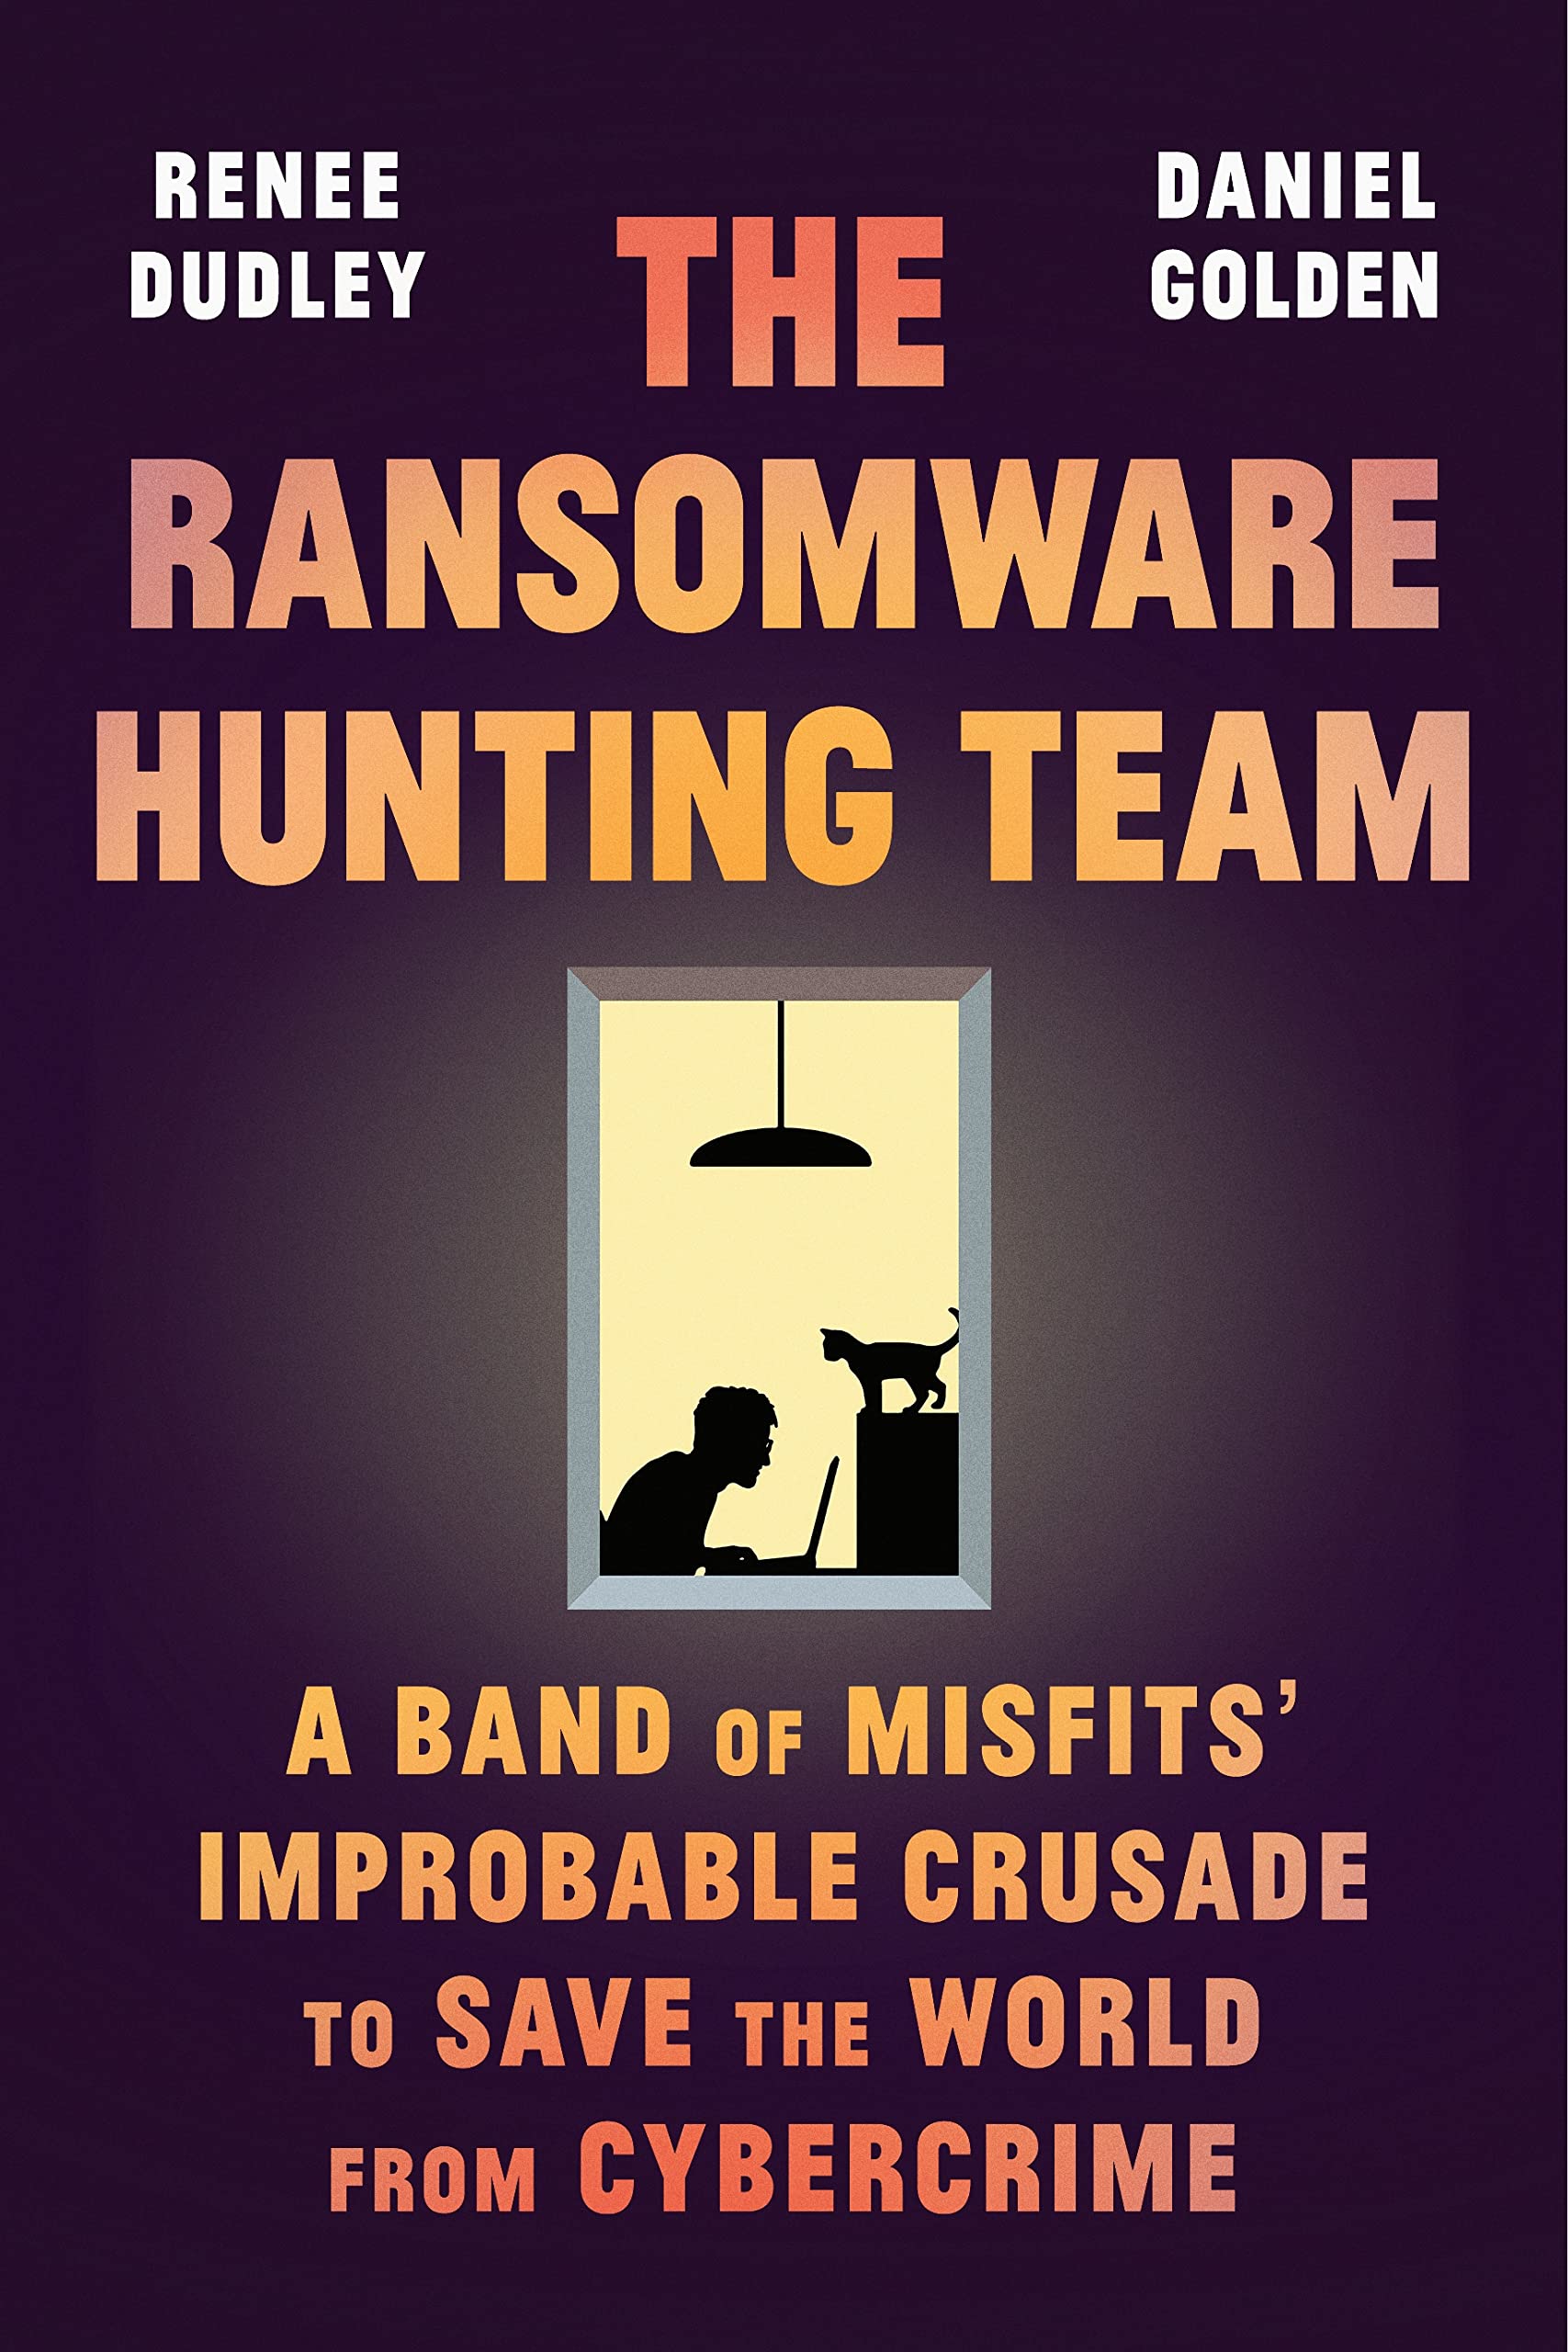 The book cover for The Ransomware Hunting Team by Renee Dudley and Daniel Golden